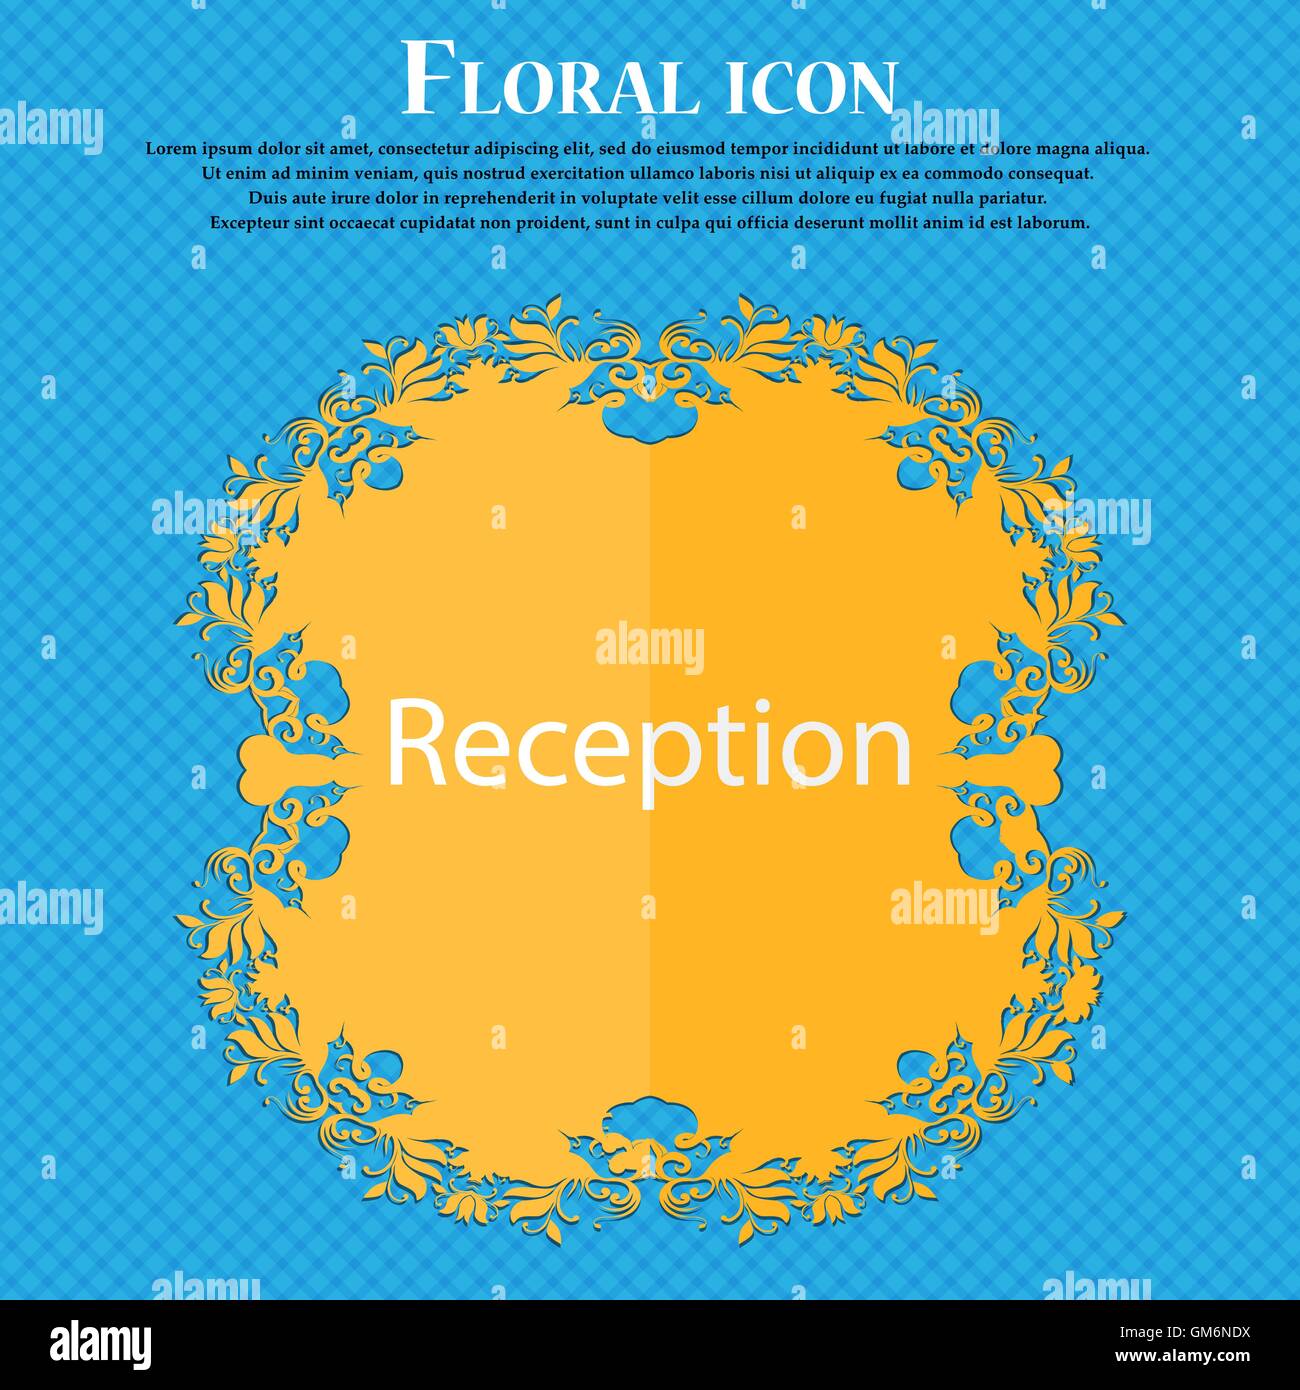 Reception sign icon. Hotel registration table symbol. Floral flat design on a blue abstract background with place for your text. Vector Stock Vector